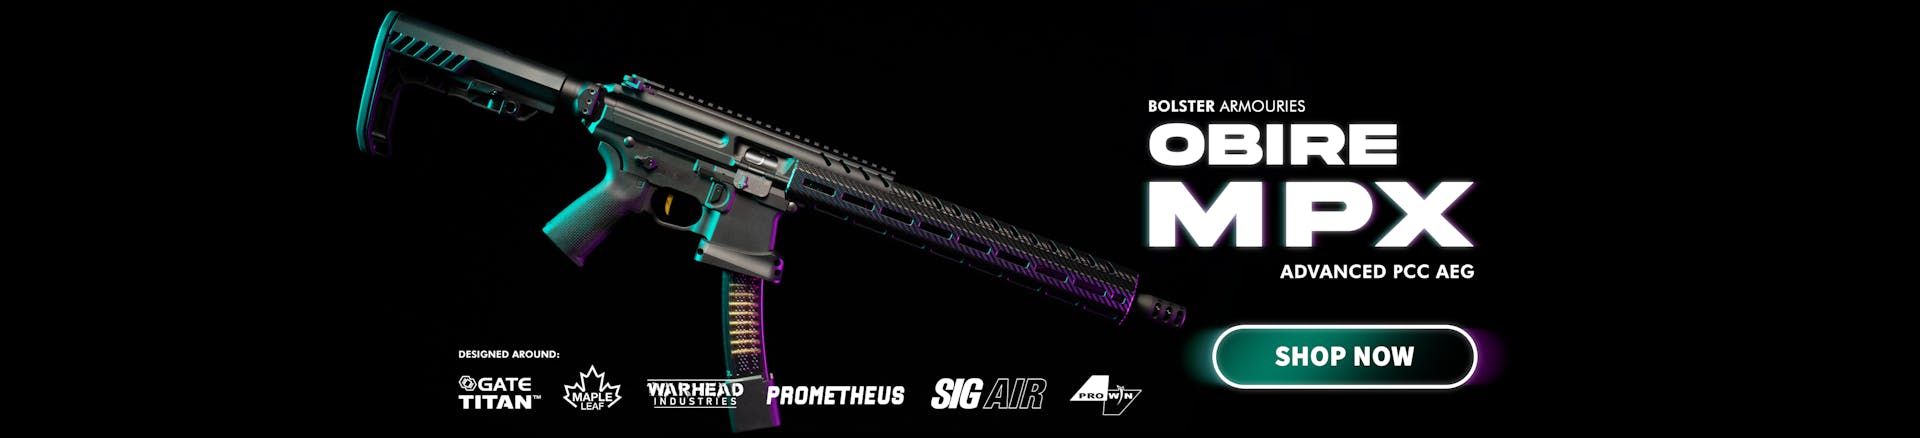 BOLSTER ARMOURIES - OBIRE MPX